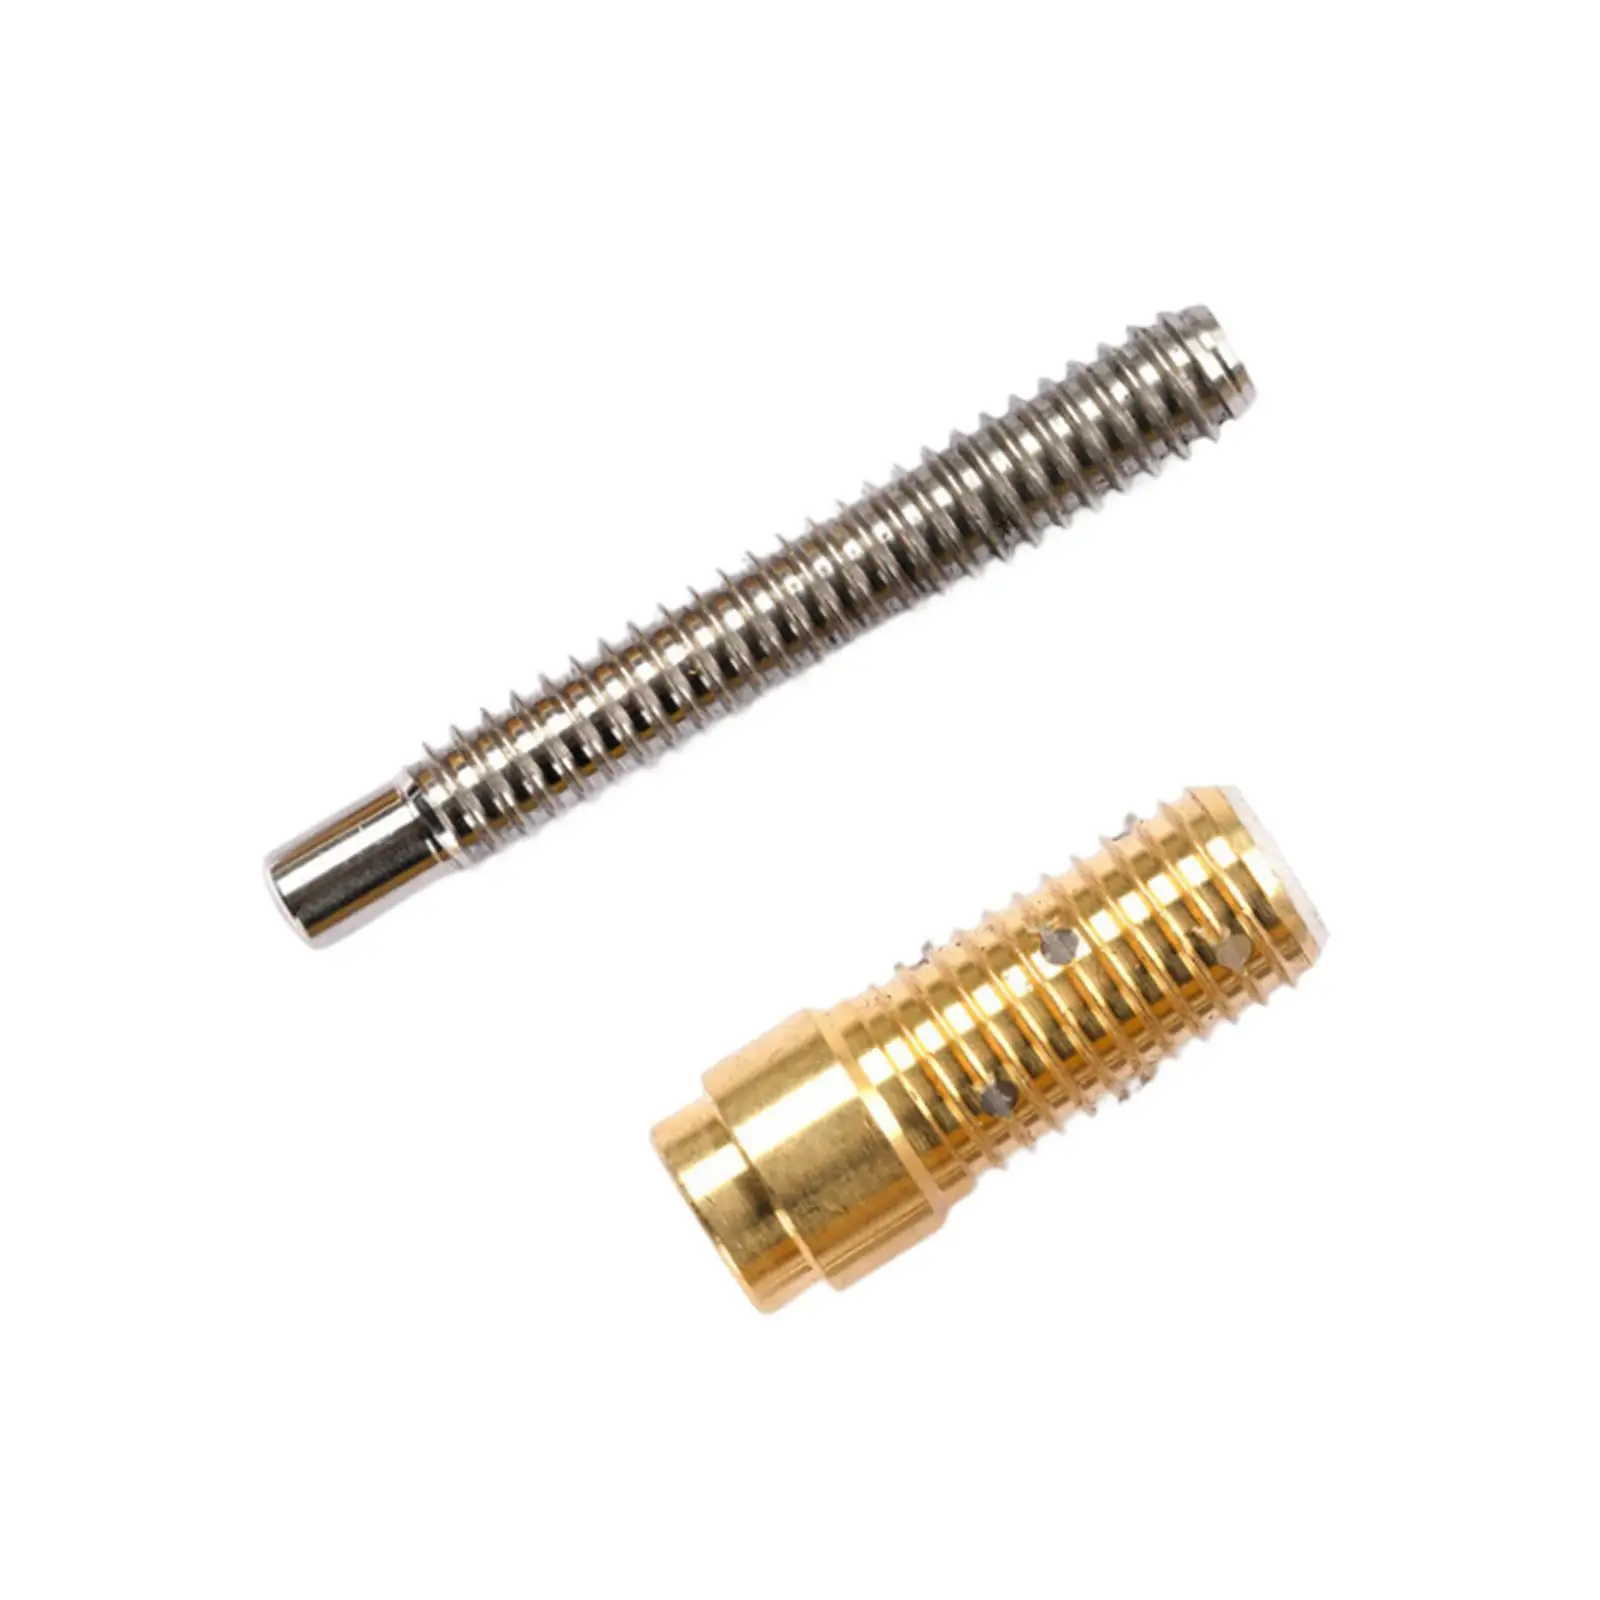 Billiards Pool Cue Joint Pin 5/16 x 14 Stainless Steel Sturdy Repair Supplies Easy to Install Accessory Shaft Fittings